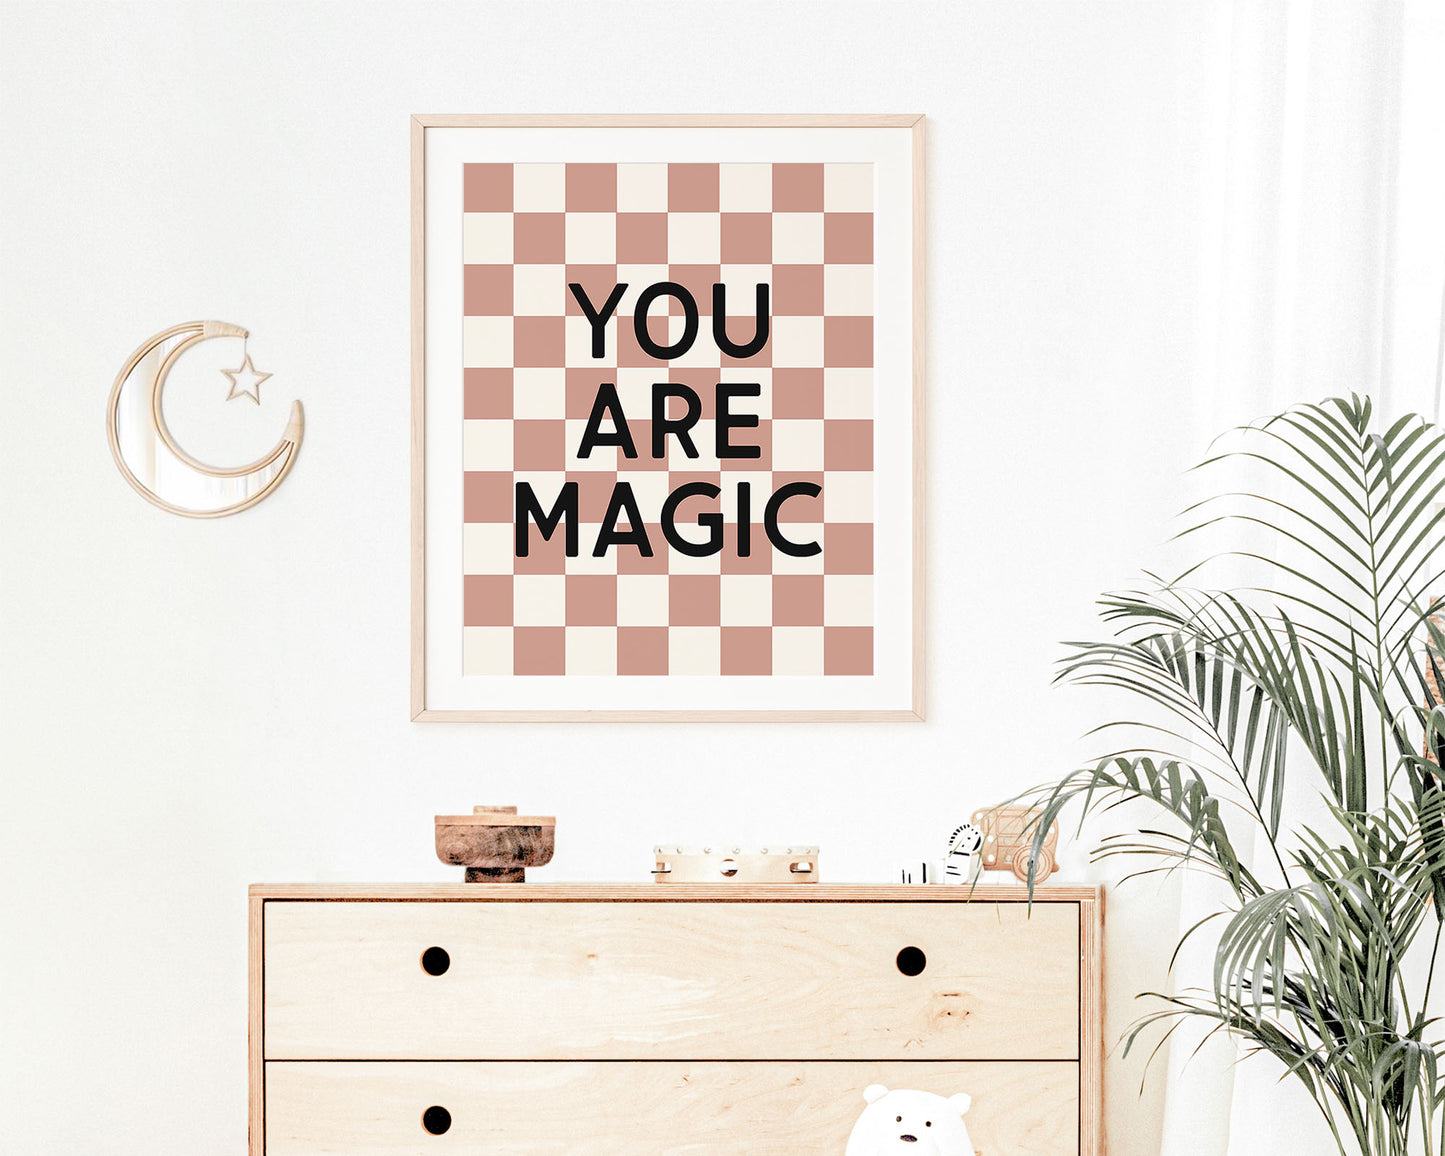 You Are Magic Instant Download Digital File featuring block lettering in black on an dusky rose and off white checkered background.